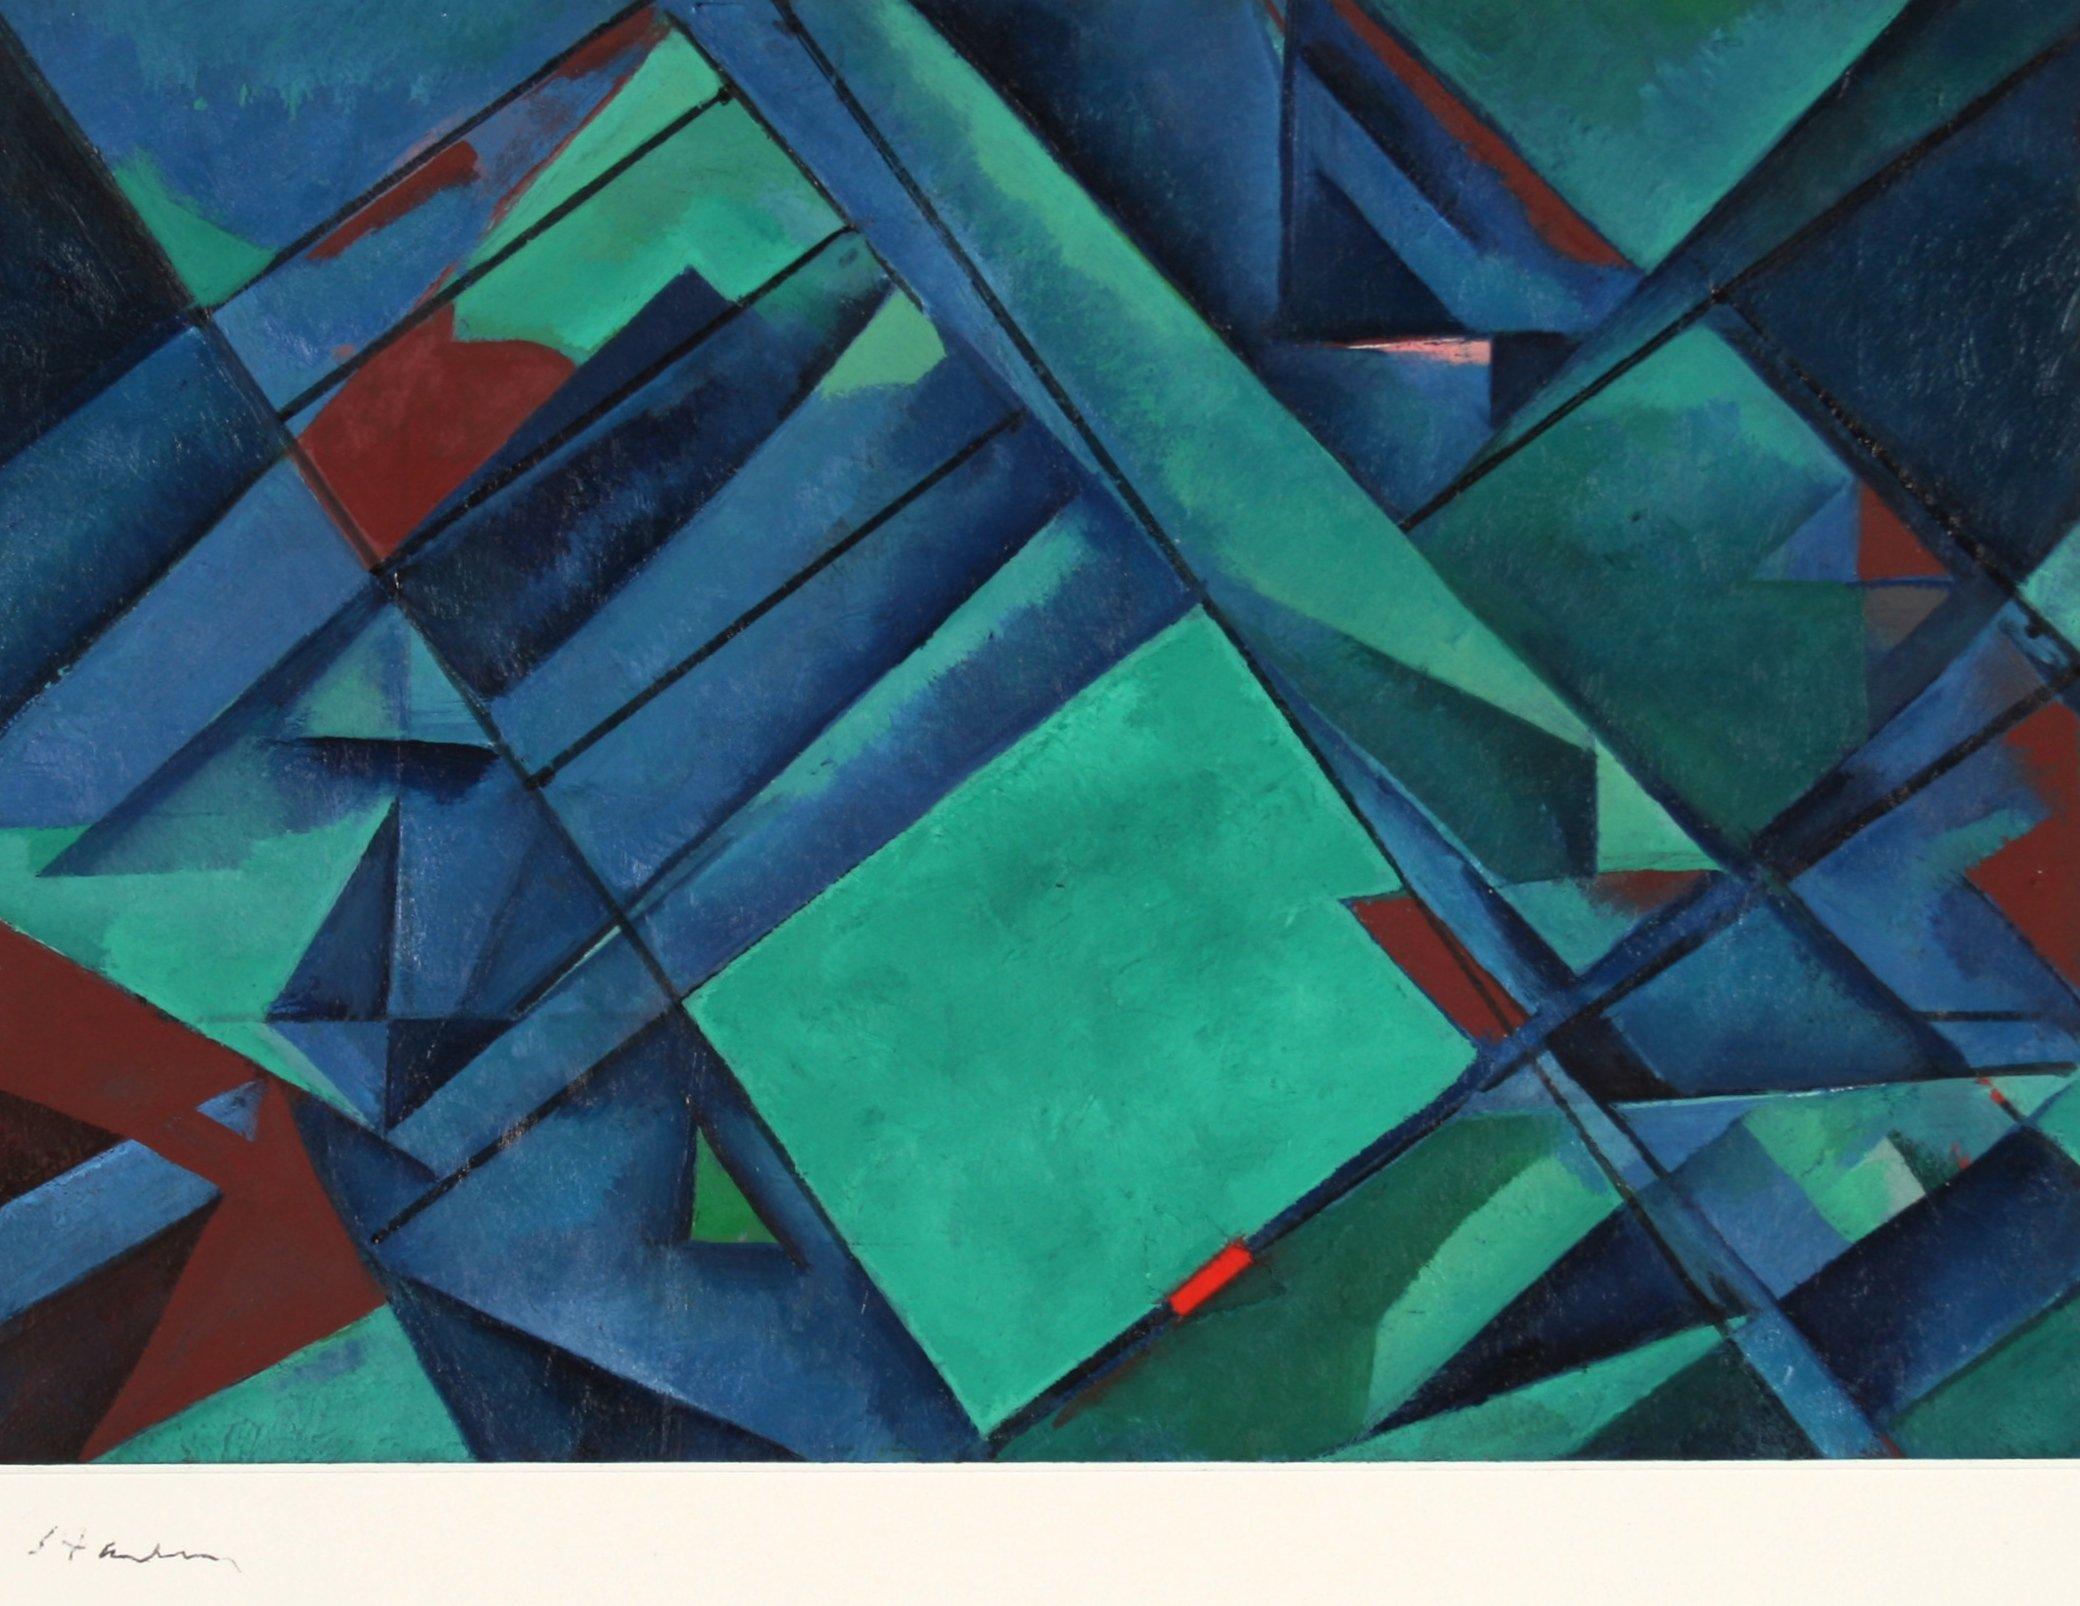 Schuyler Standish Abstract Painting - "Composition - Study" Late 20th Century Oil on Paper in Blue and Green